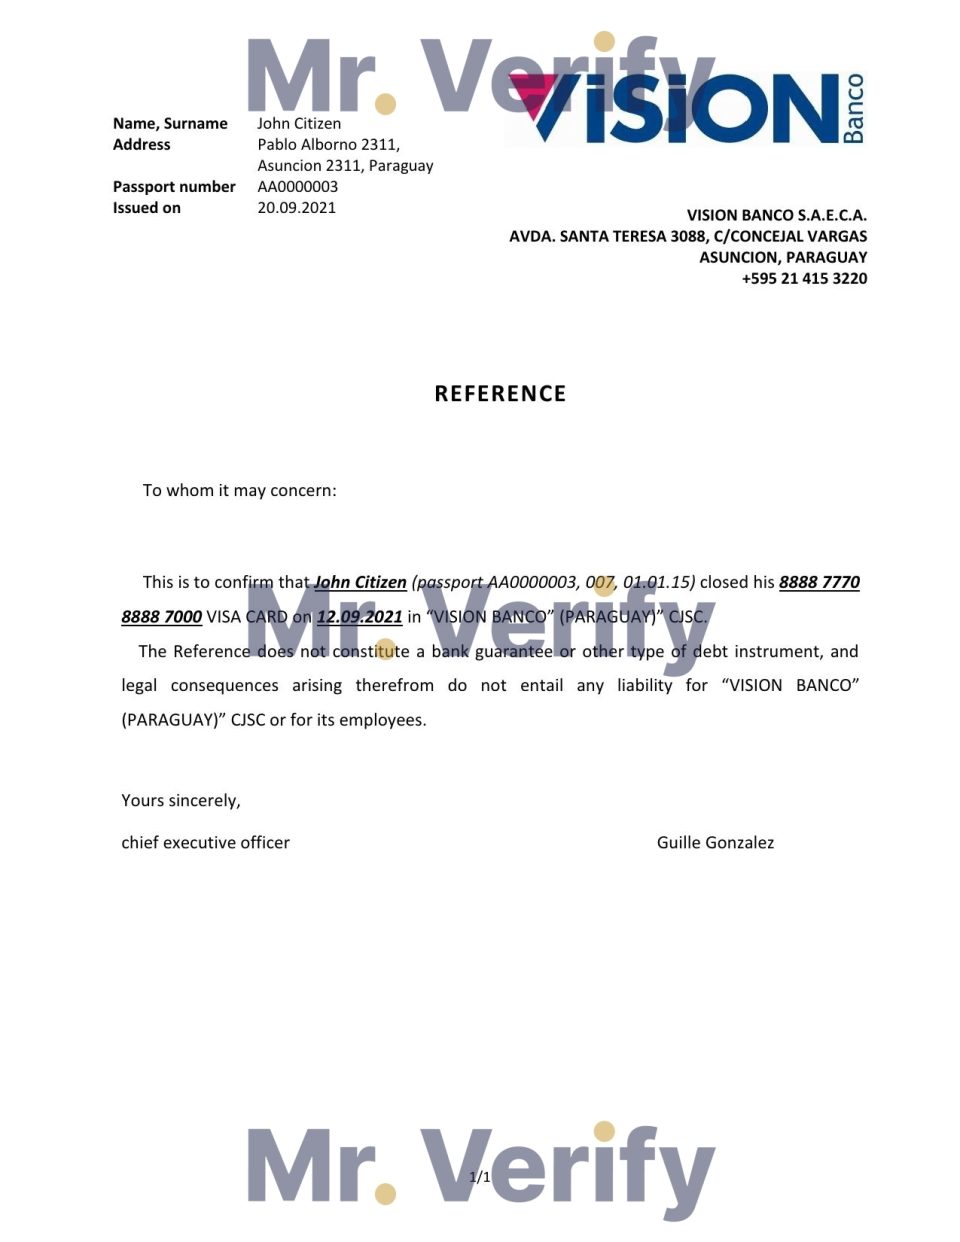 Download Paraguay Vision Banco Bank Reference Letter Templates | Editable Word